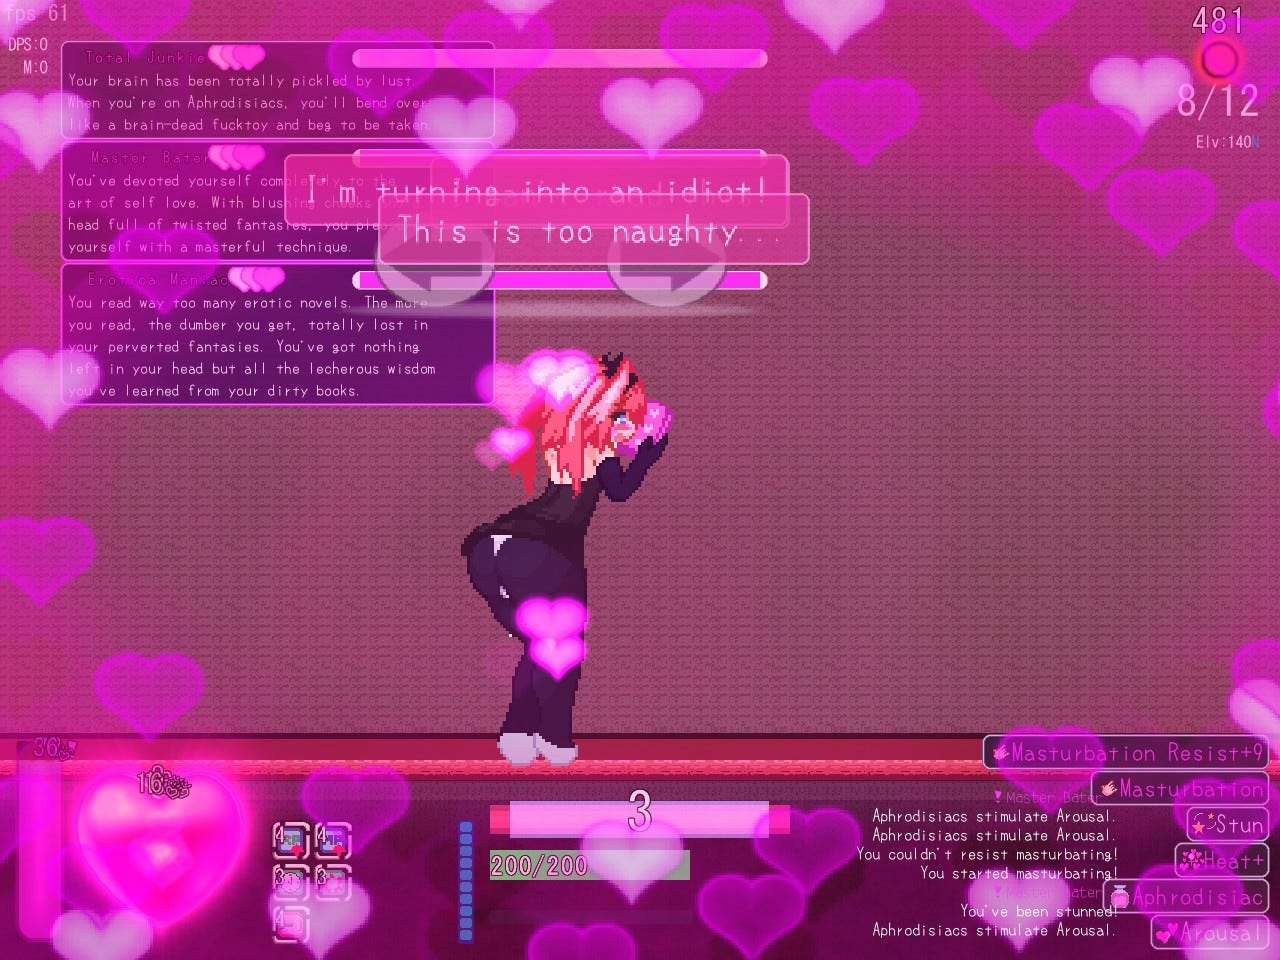 A pink-haired girl is drooling while reading an erotic book. The screen has a pink hue and is full of pink hearts